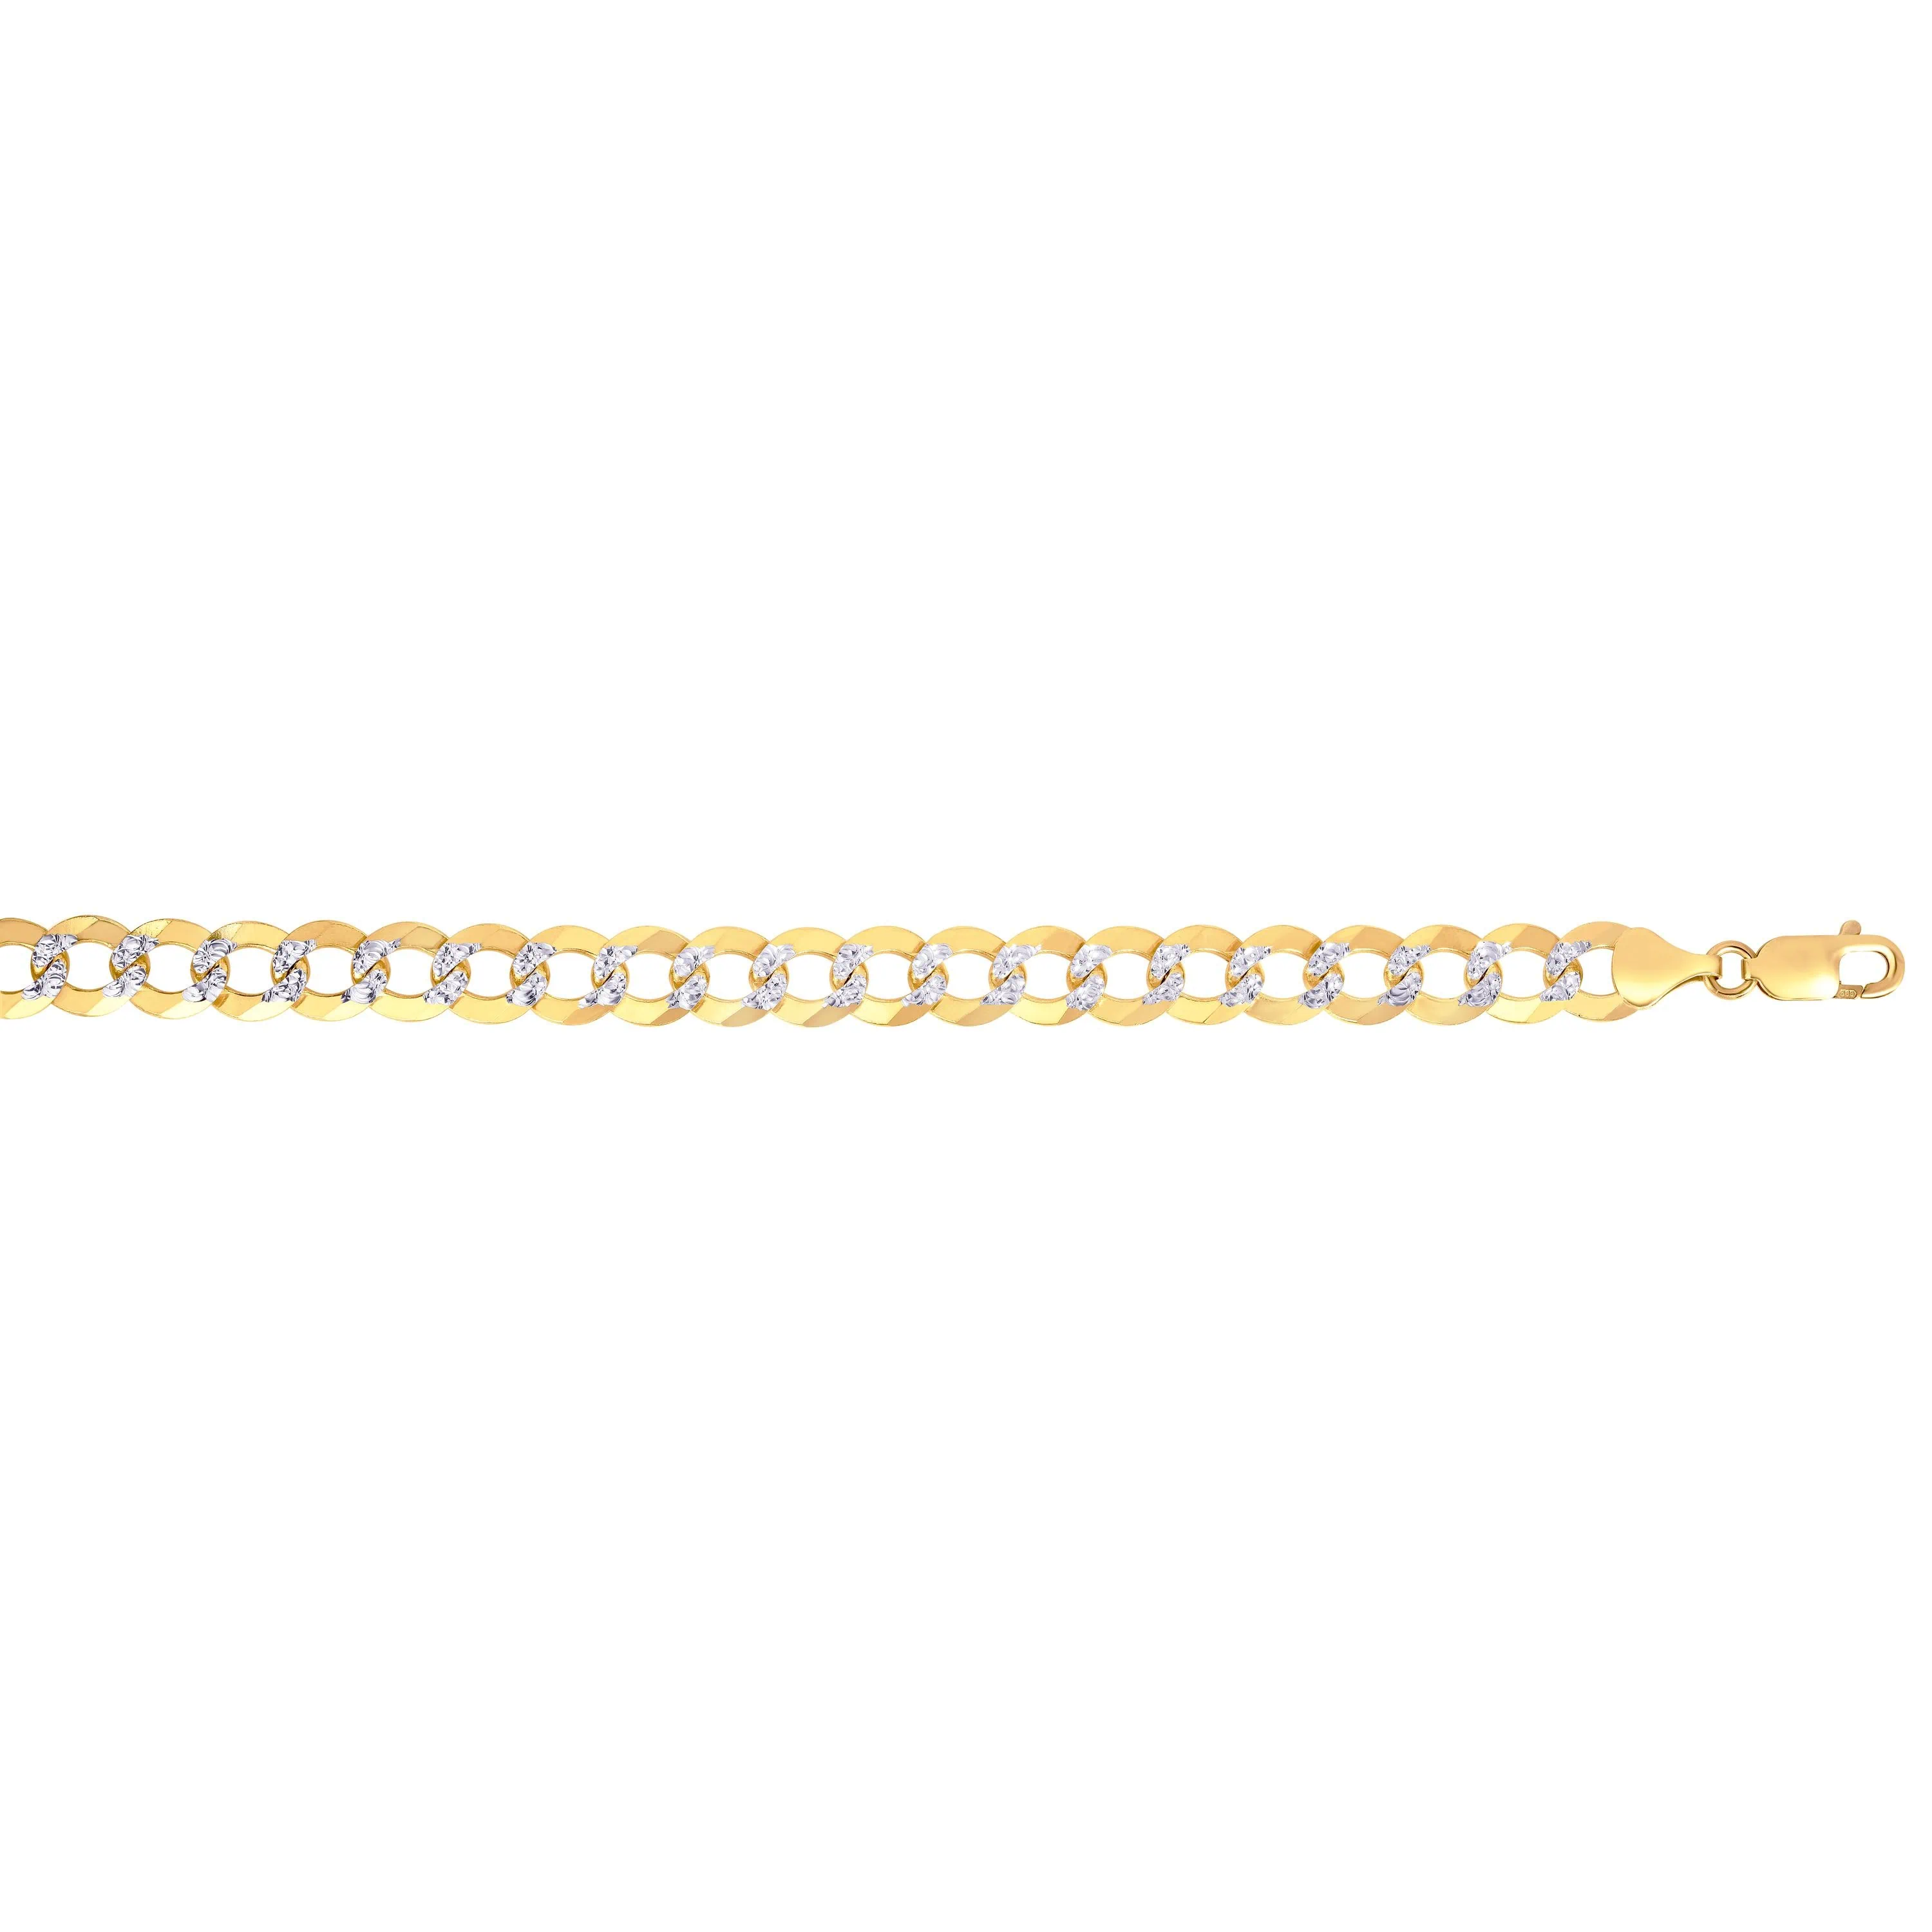 14K Gold 12.18mm White Pave Curb Chain